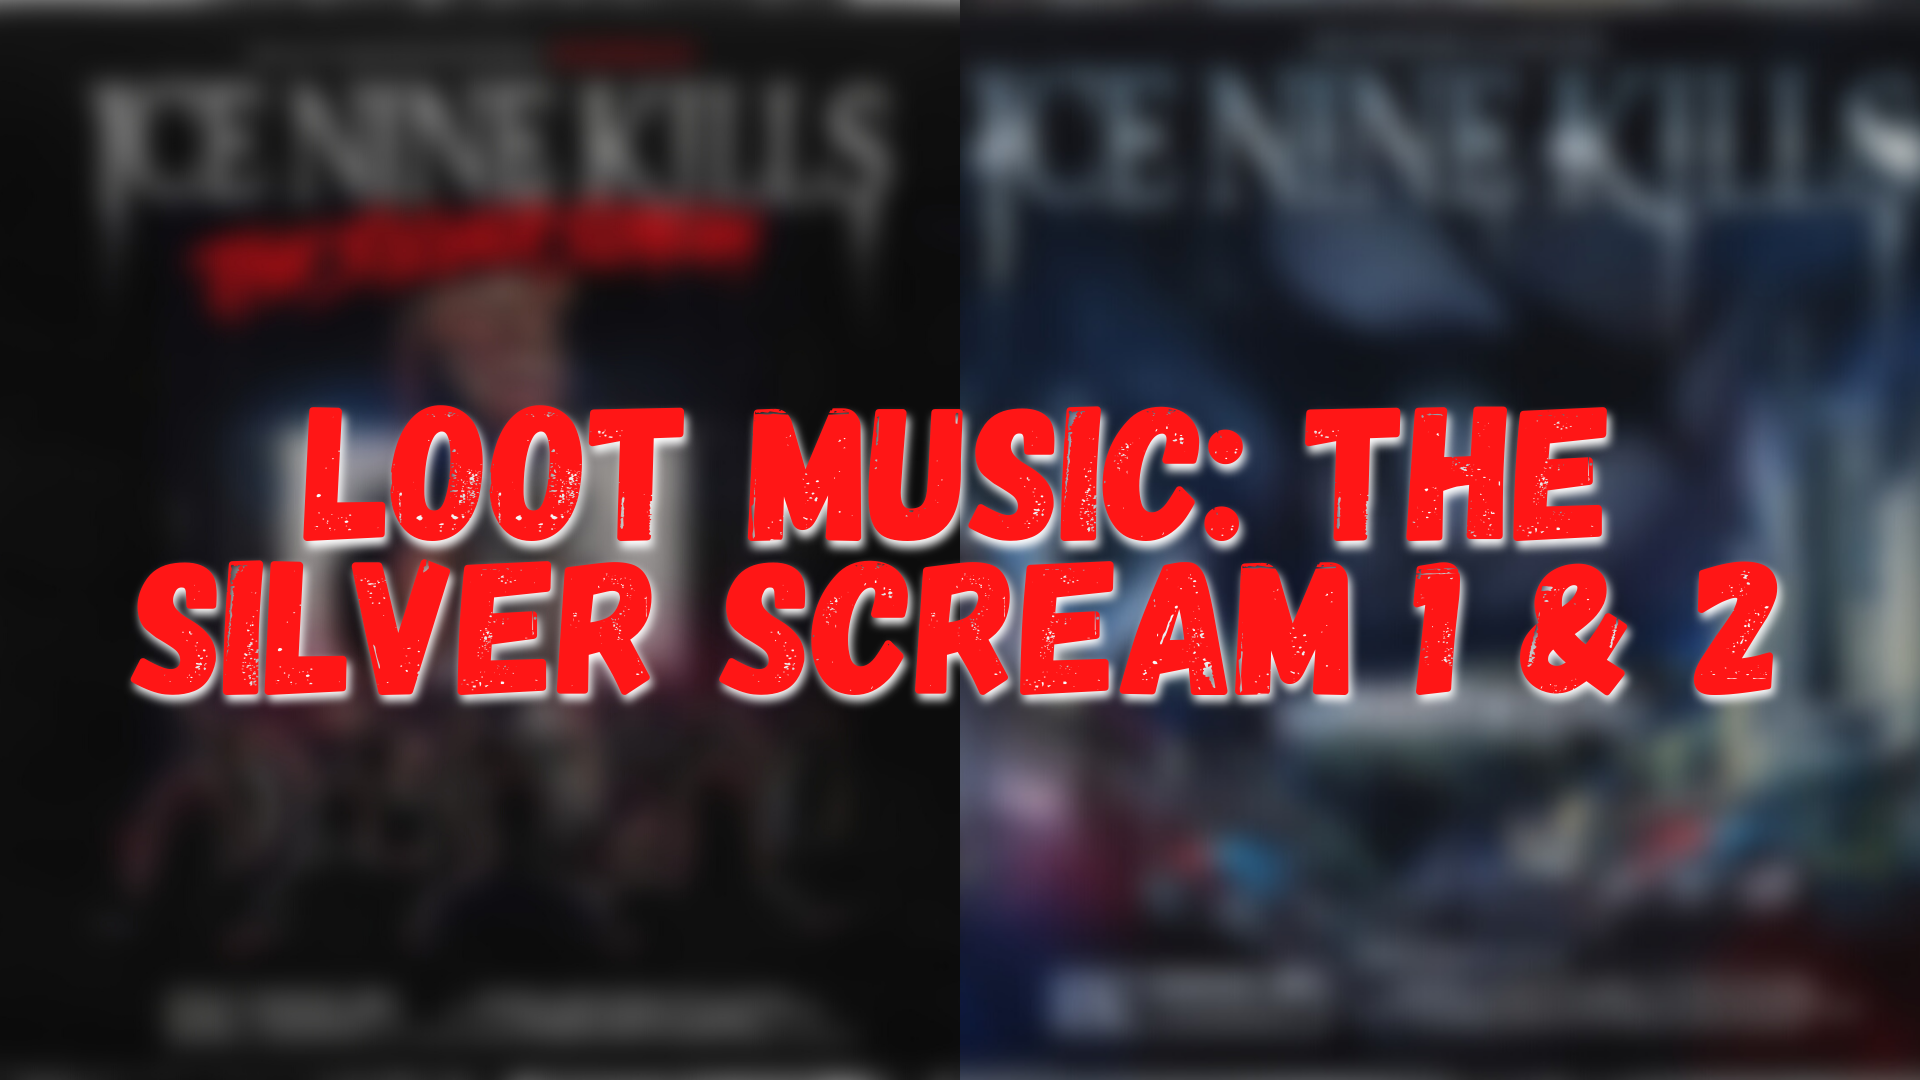 The Daily Crate | Loot Music: The Silver Scream 1 & 2